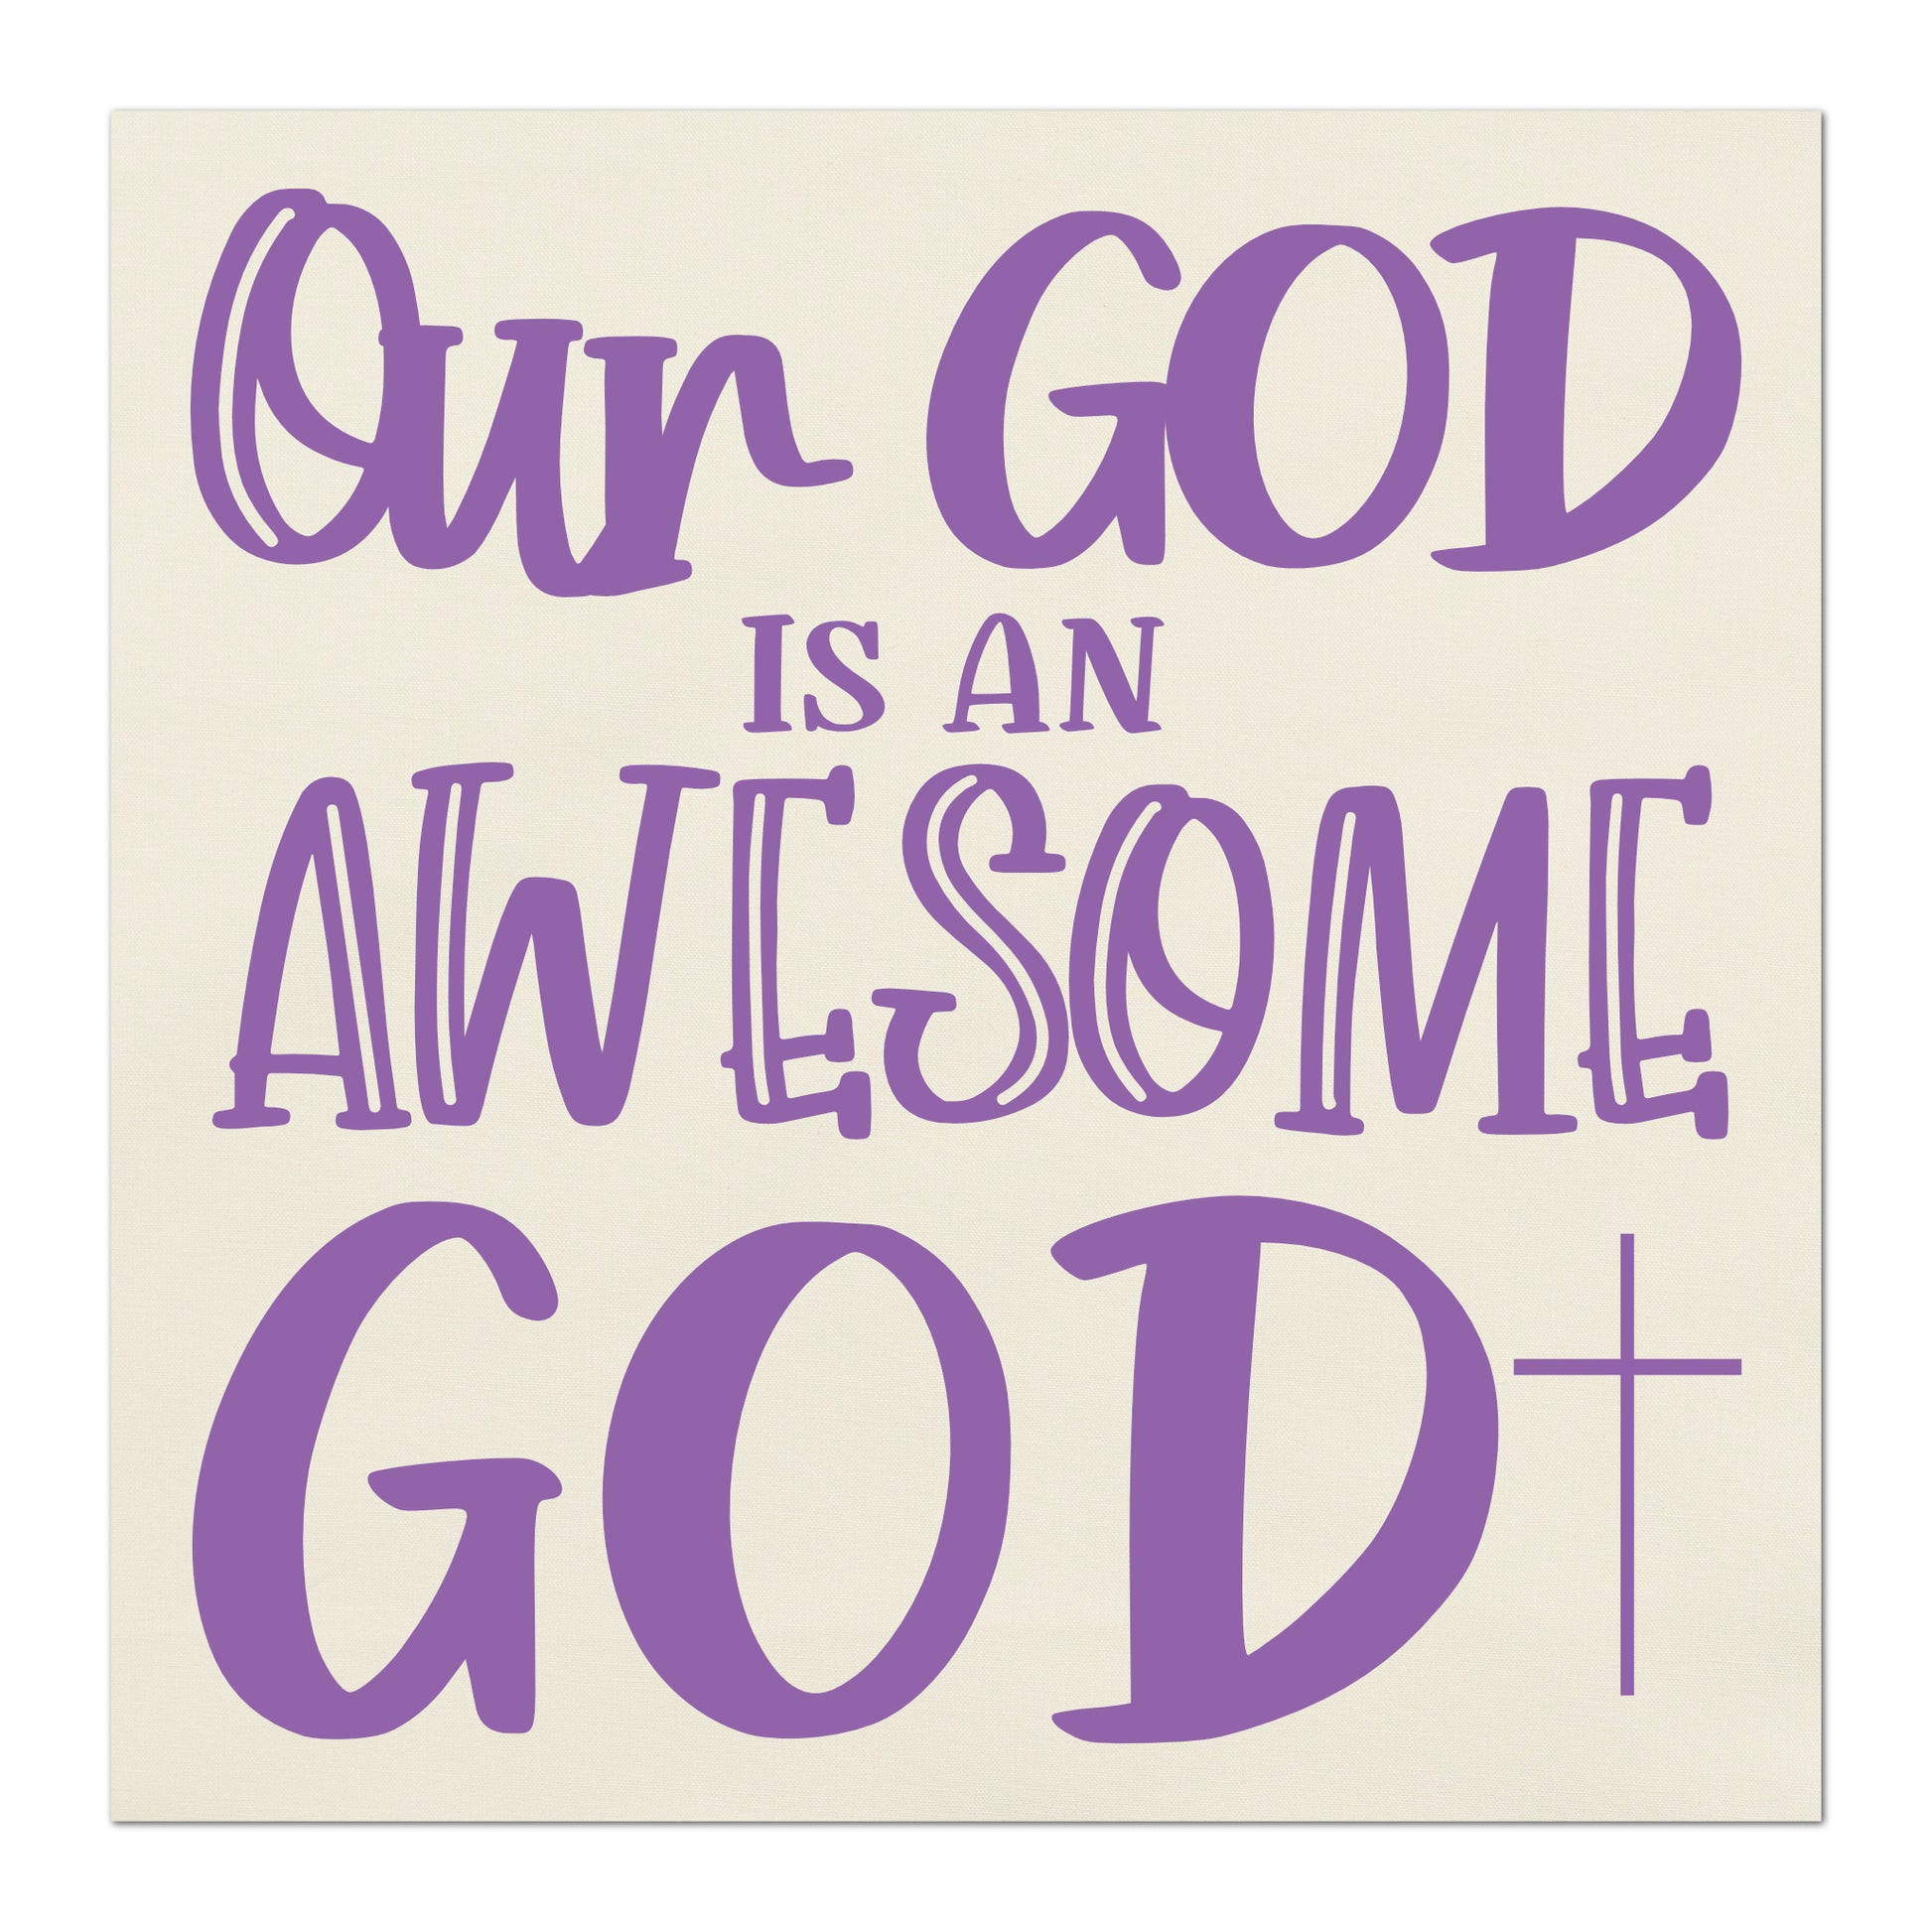 Our God Is An Awesome God - Fabric Panel Print, Wall Art, Christian Fabric, Quilt Block